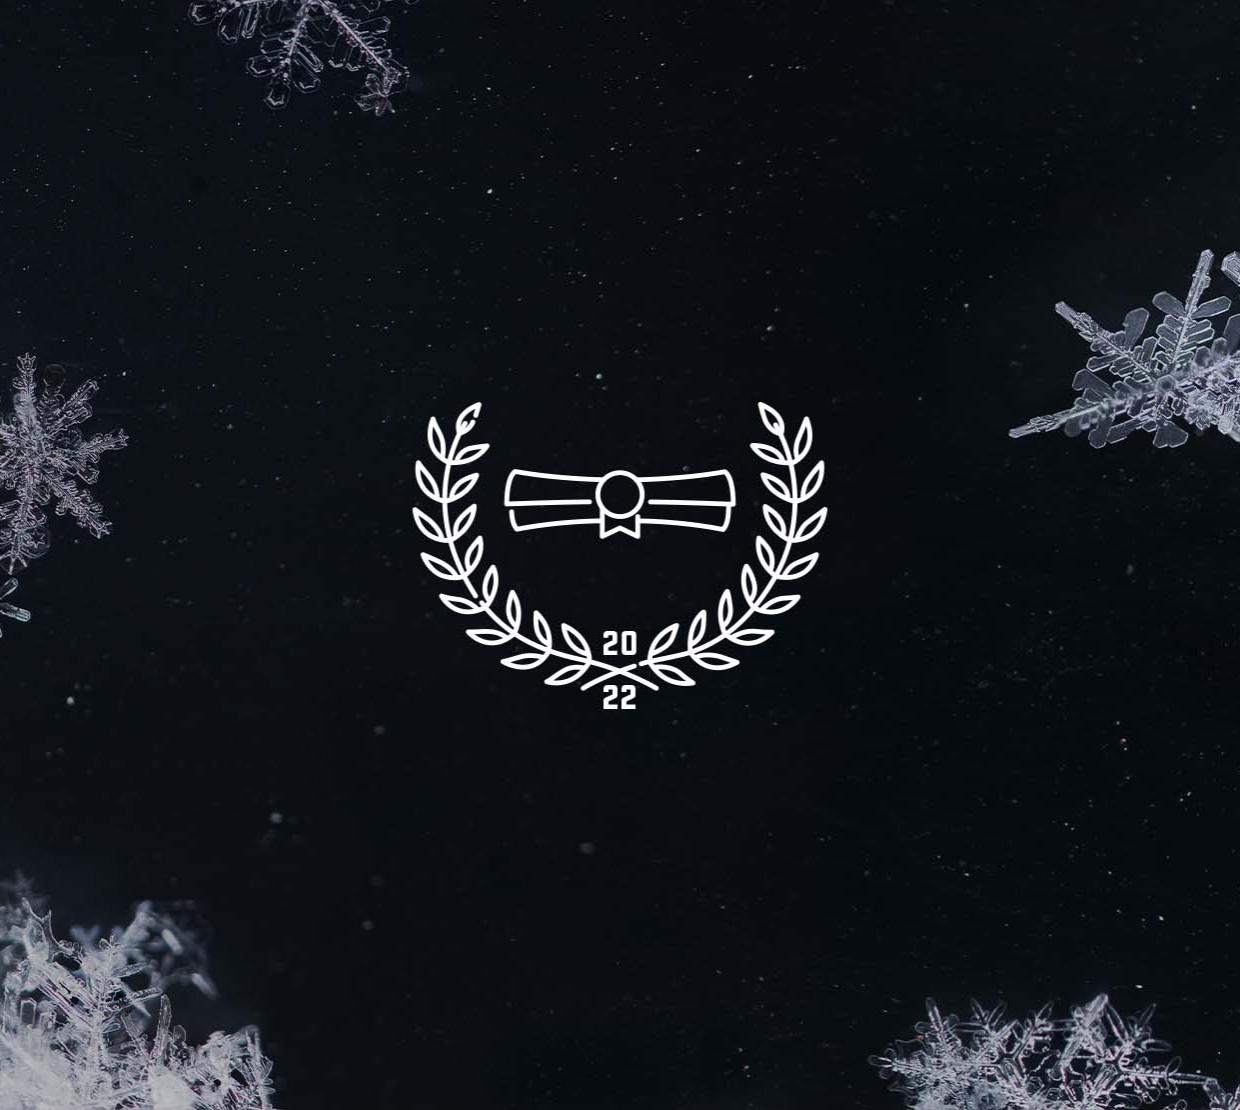 A laurel leaf icon with a scroll, surrounded by a border of snowflakes.